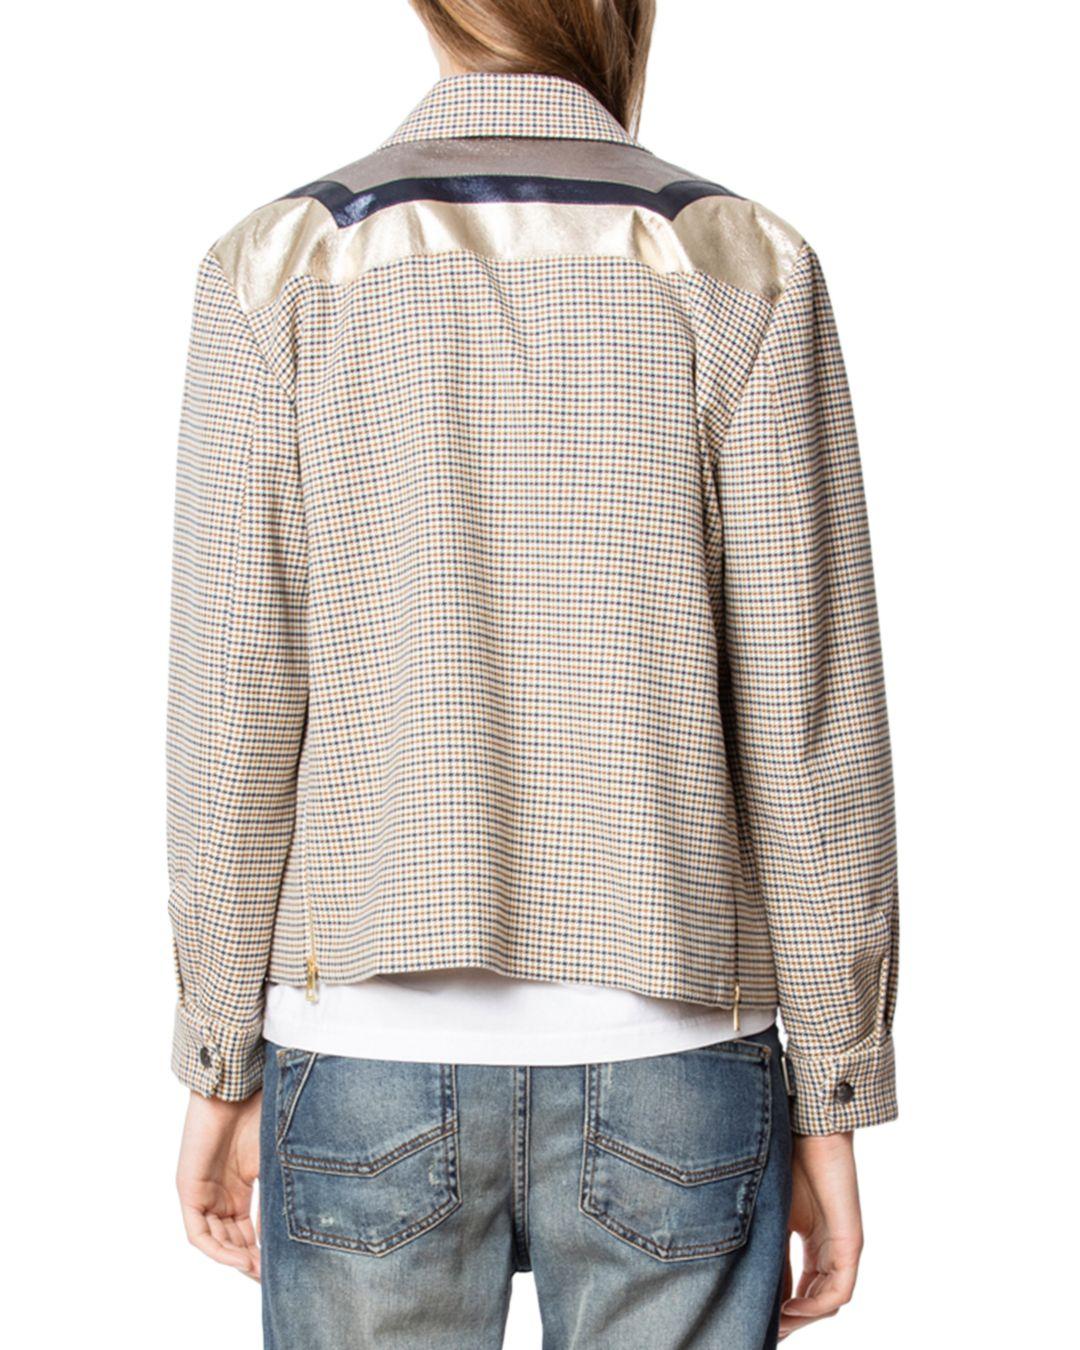 Zadig & Voltaire Kartys Car Jacket in Cream (Natural) - Lyst